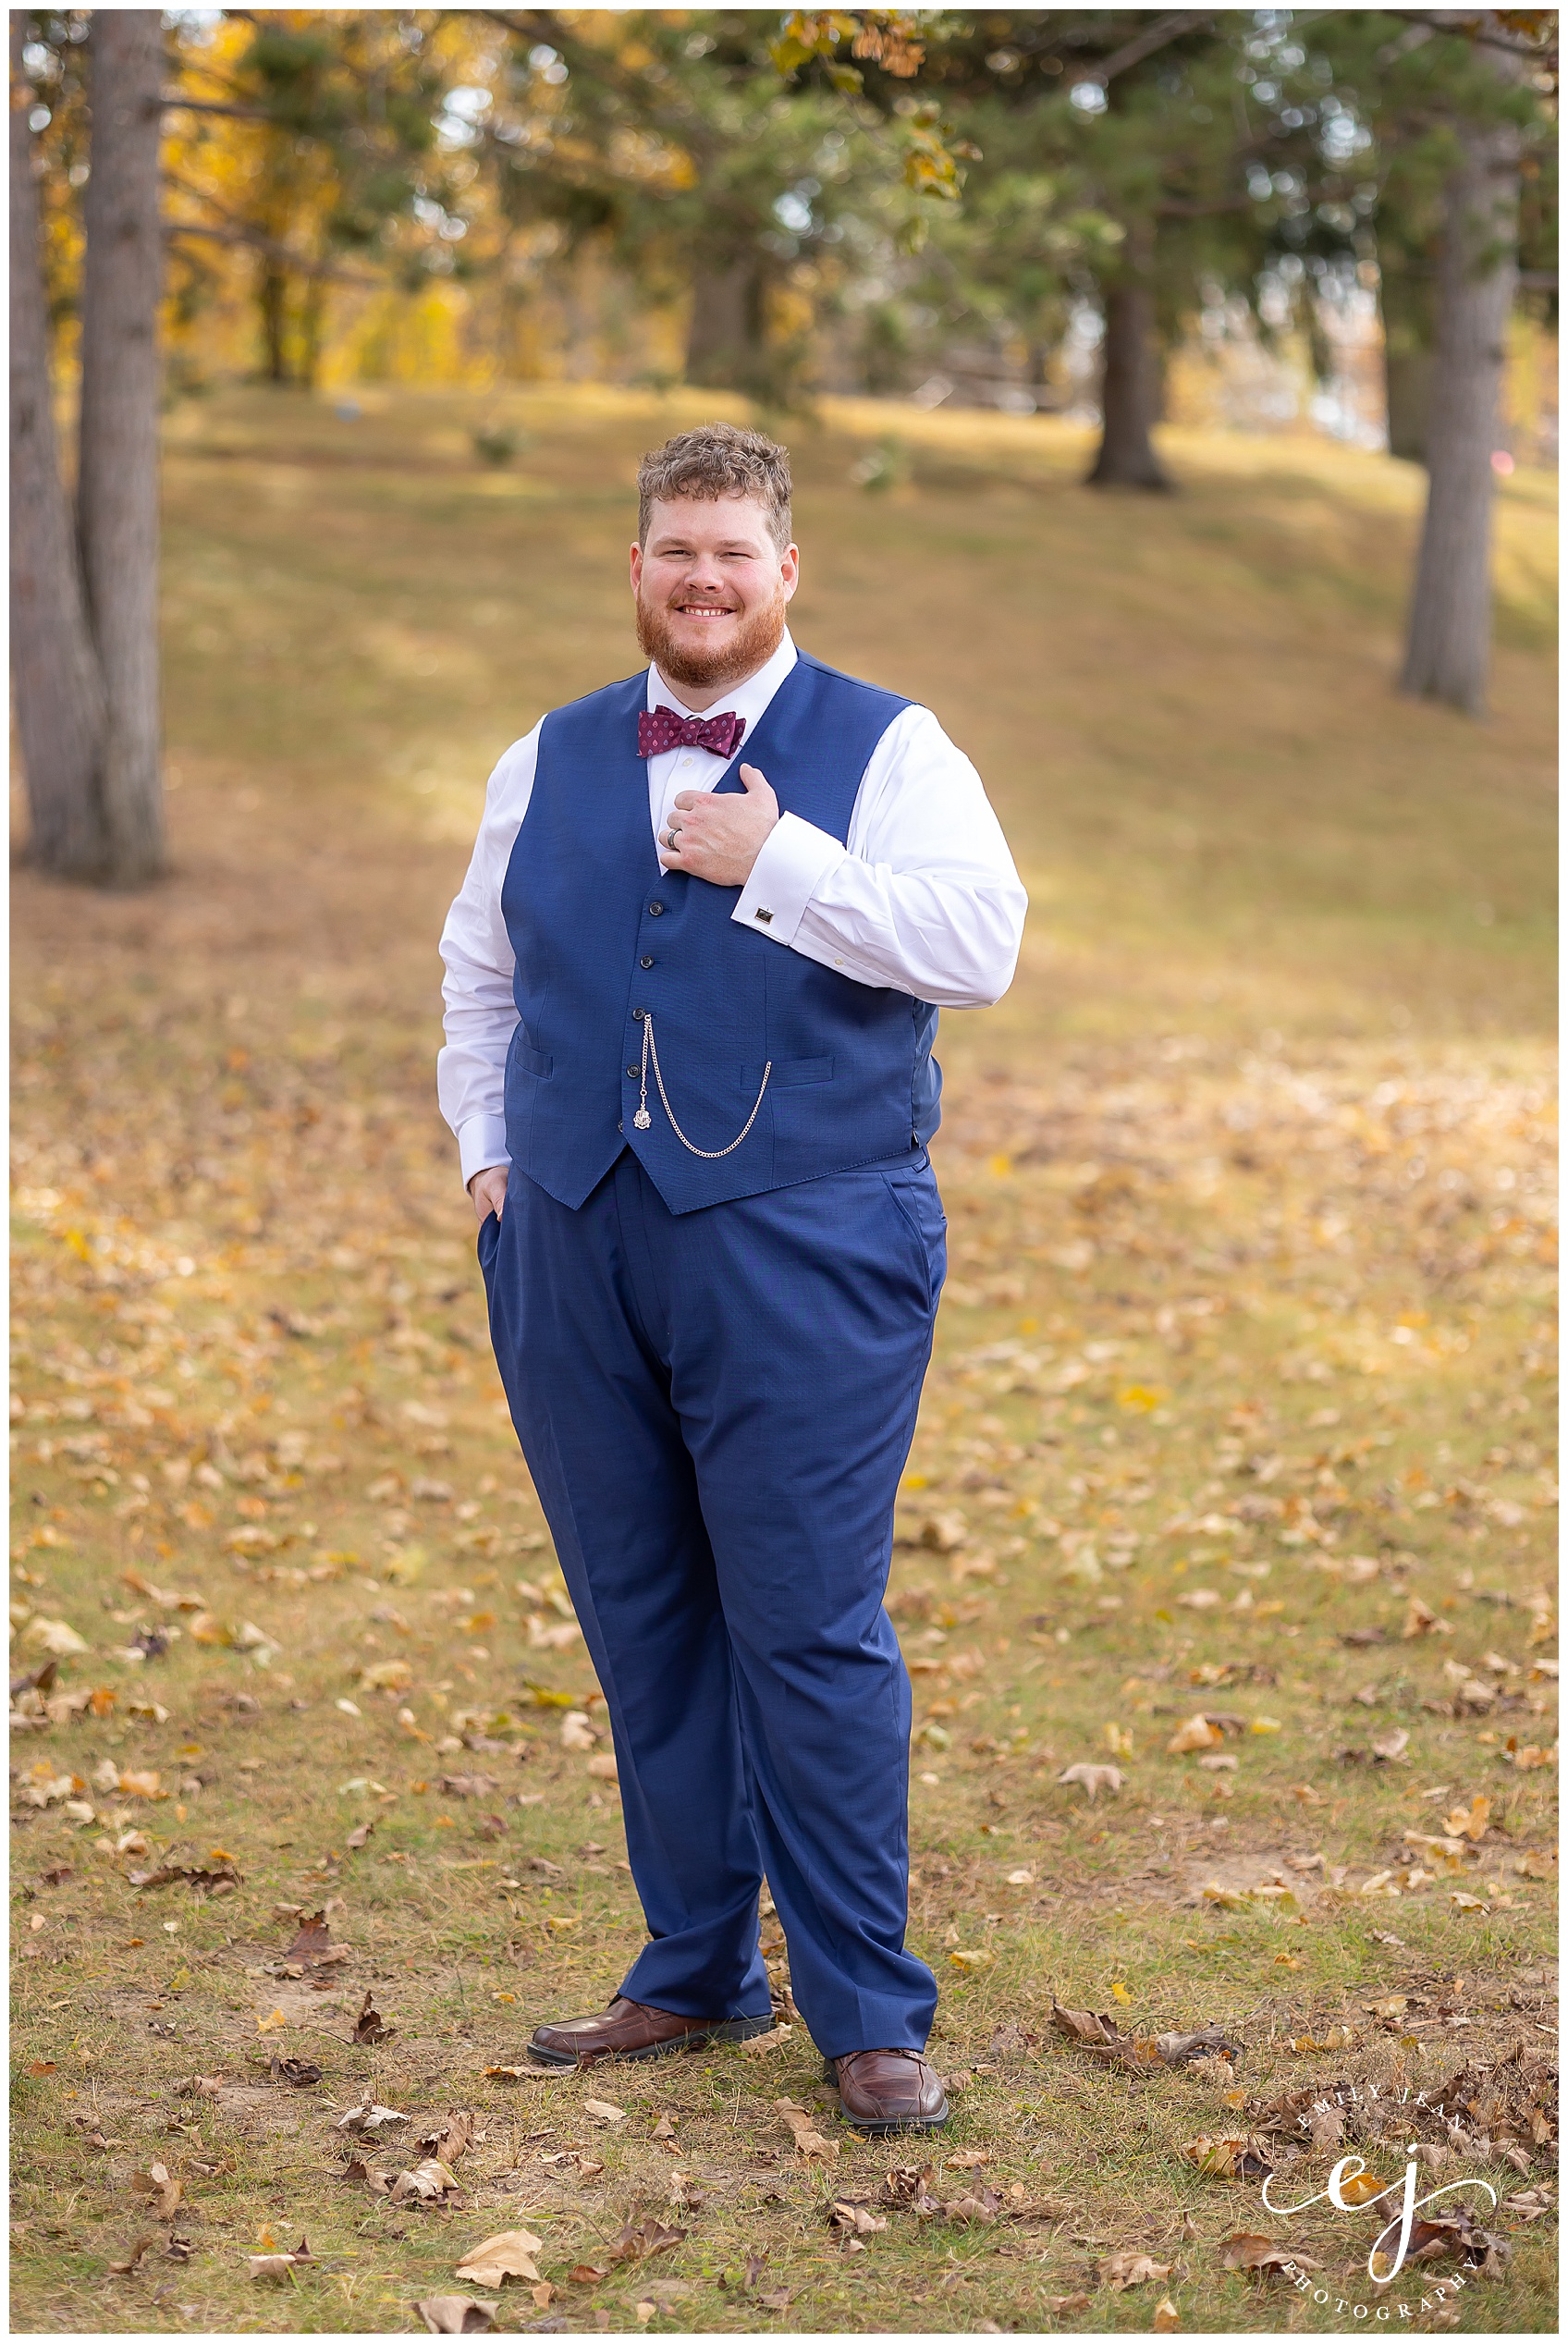 Groom with navy vest and pocket watch portrait